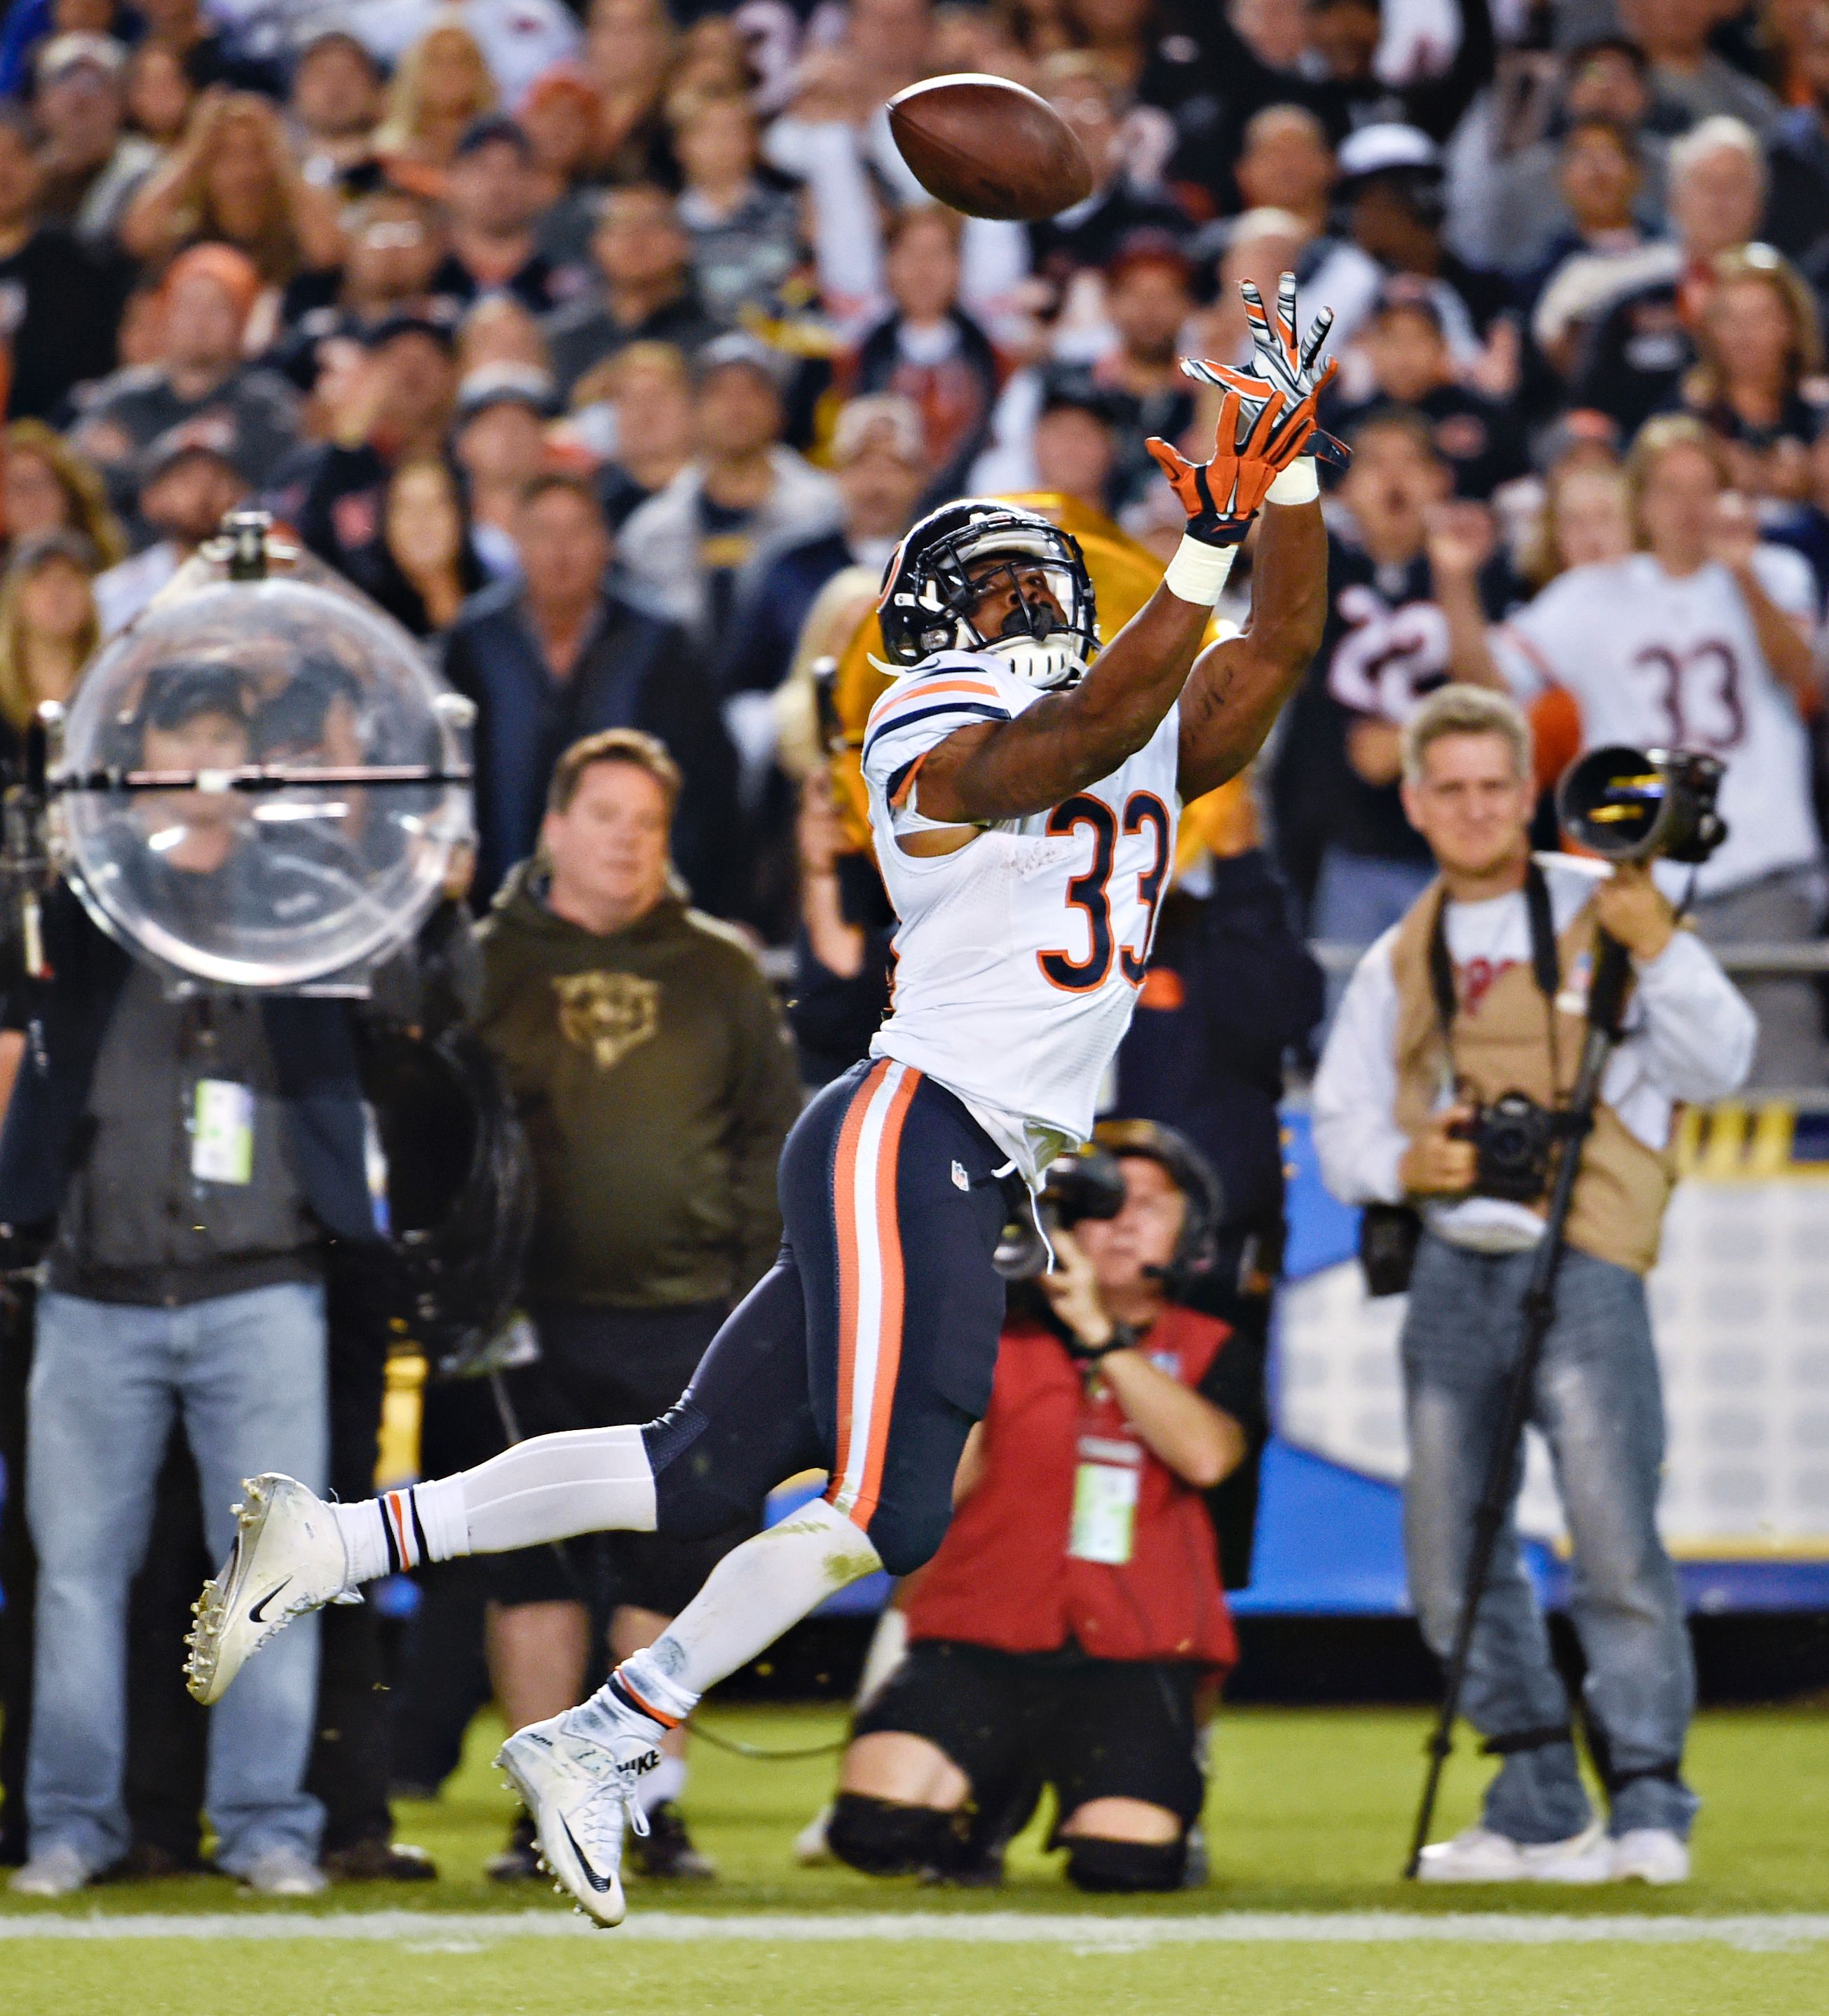 Jeremy Langford Catch Photos Bears vs. Chargers ESPN